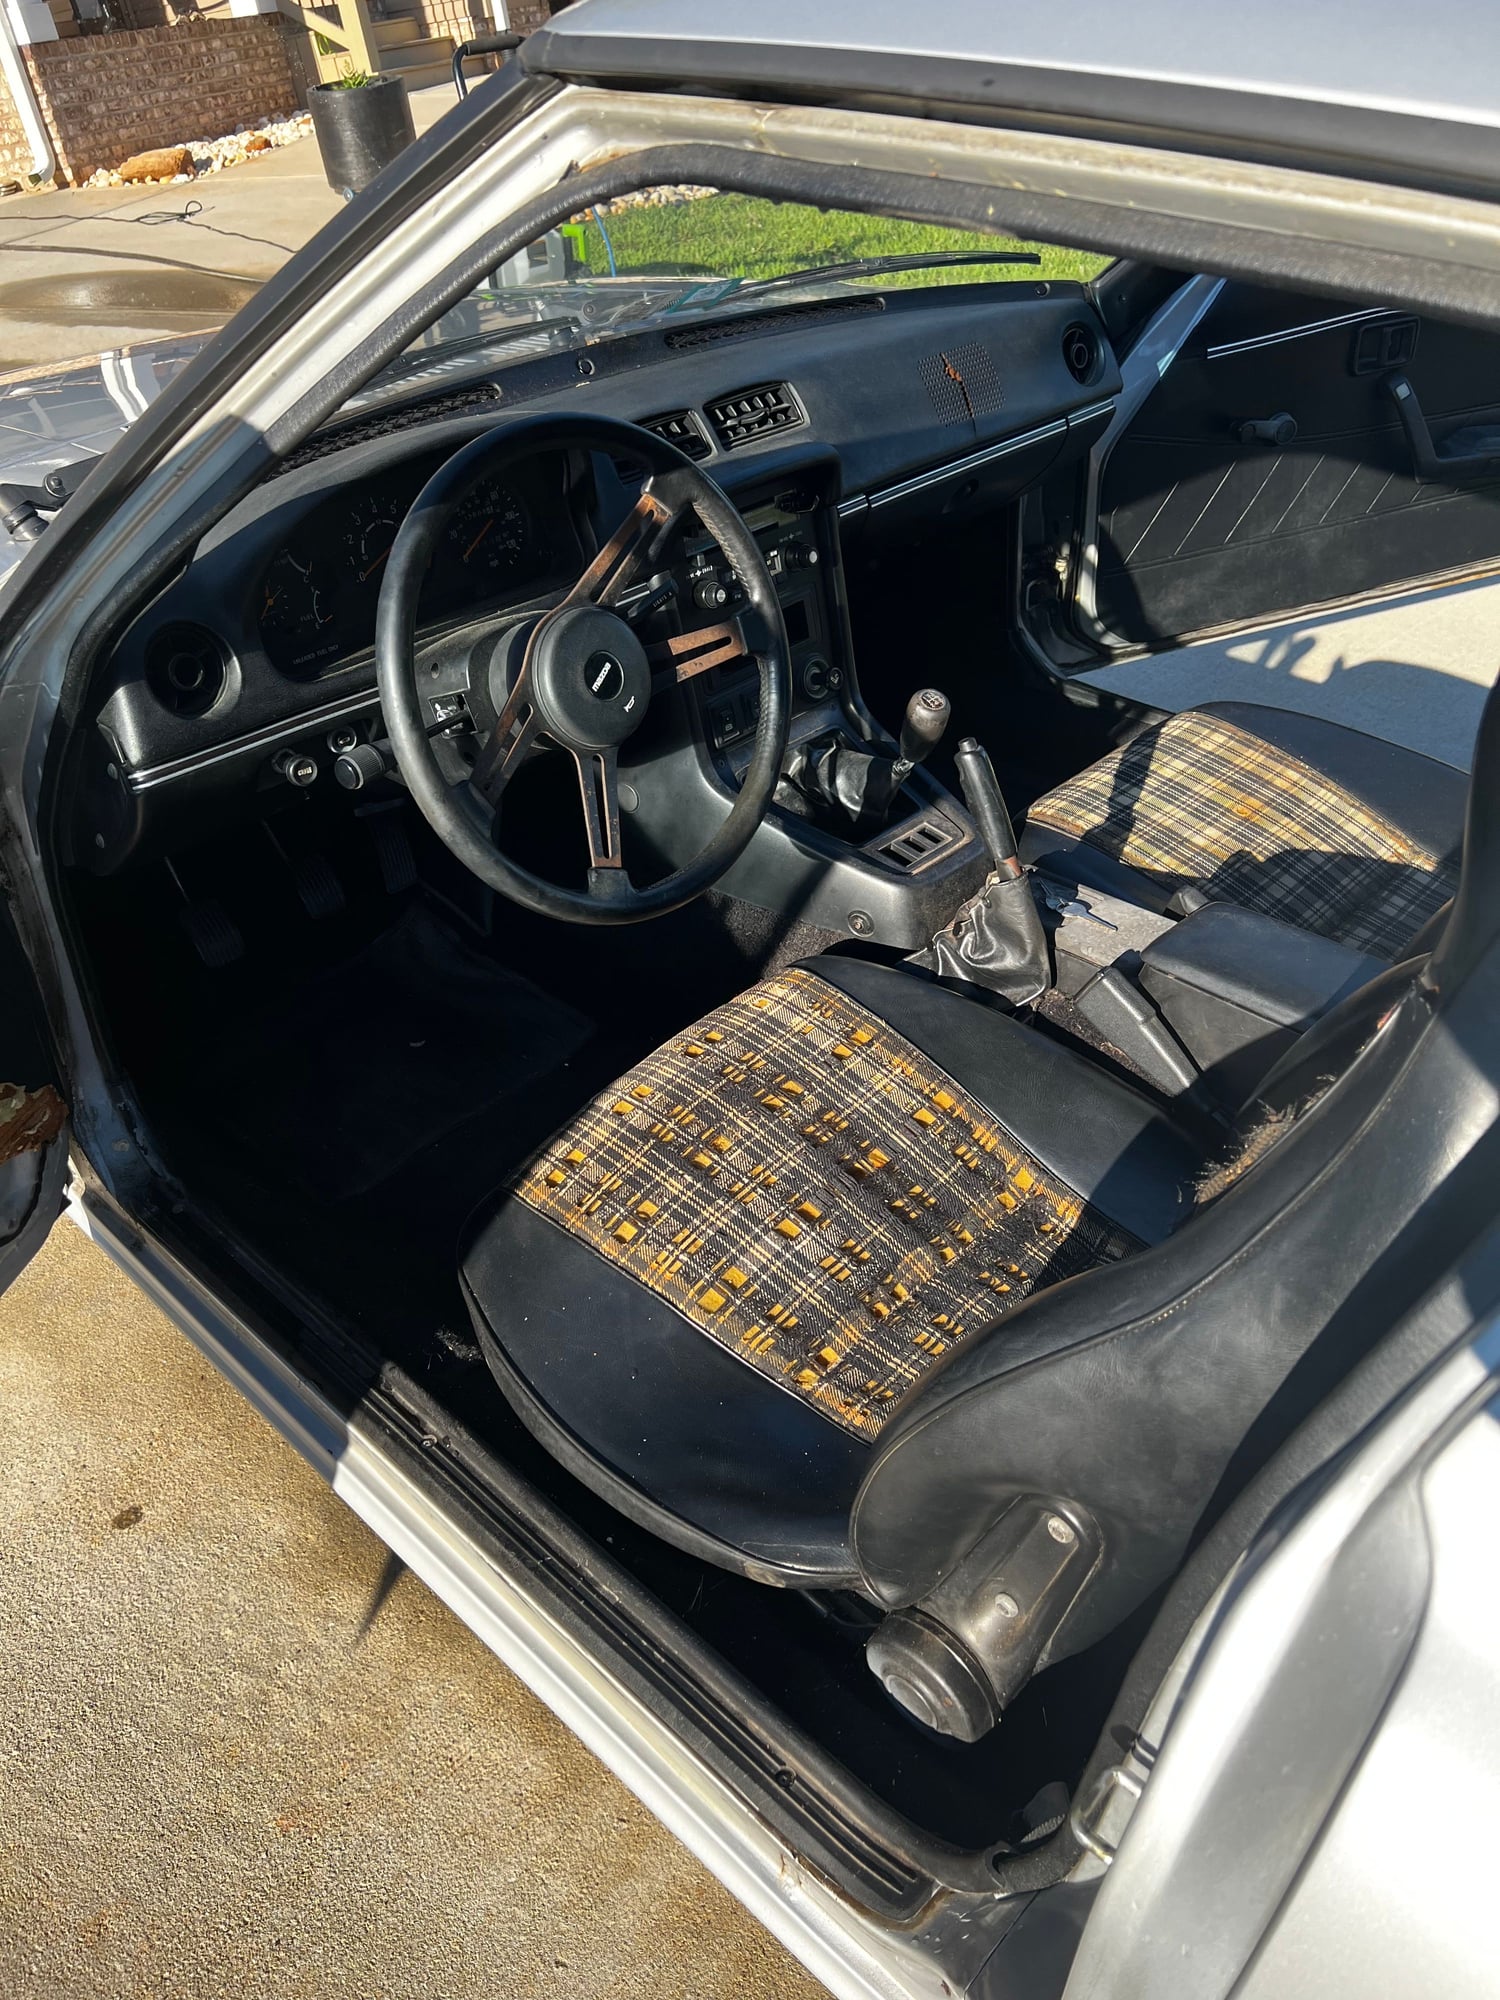 1979 Mazda RX-7 - 1979 rx-7 - Used - VIN SA22C501478 - 133,686 Miles - 2 cyl - 2WD - Manual - Coupe - Silver - Maiden, NC 28650, United States